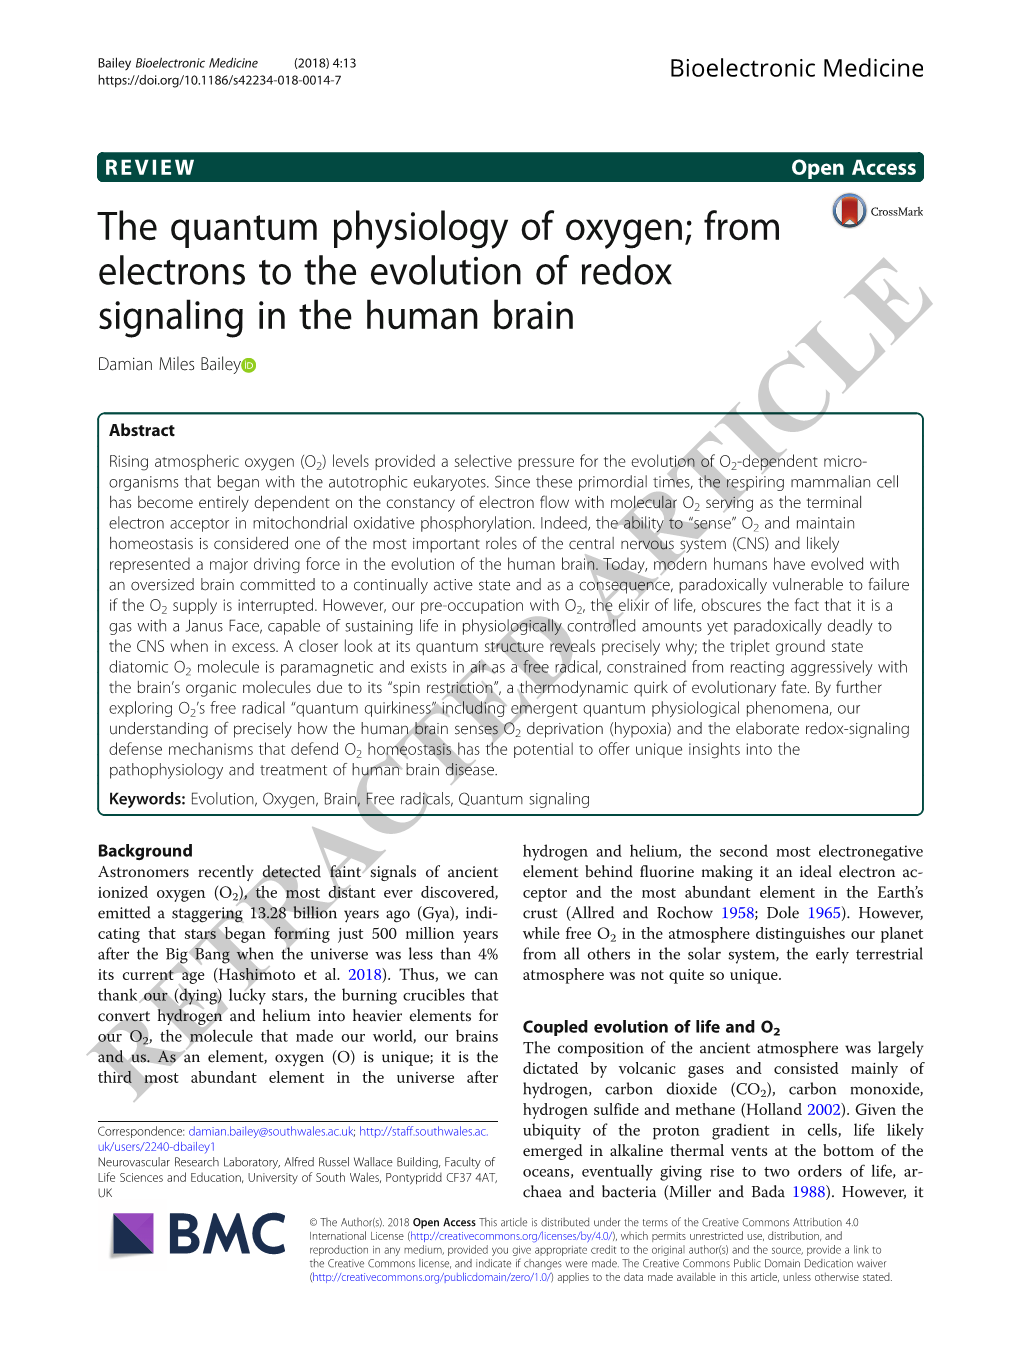 The Quantum Physiology of Oxygen; from Electrons to the Evolution of Redox Signaling in the Human Brain Damian Miles Bailey